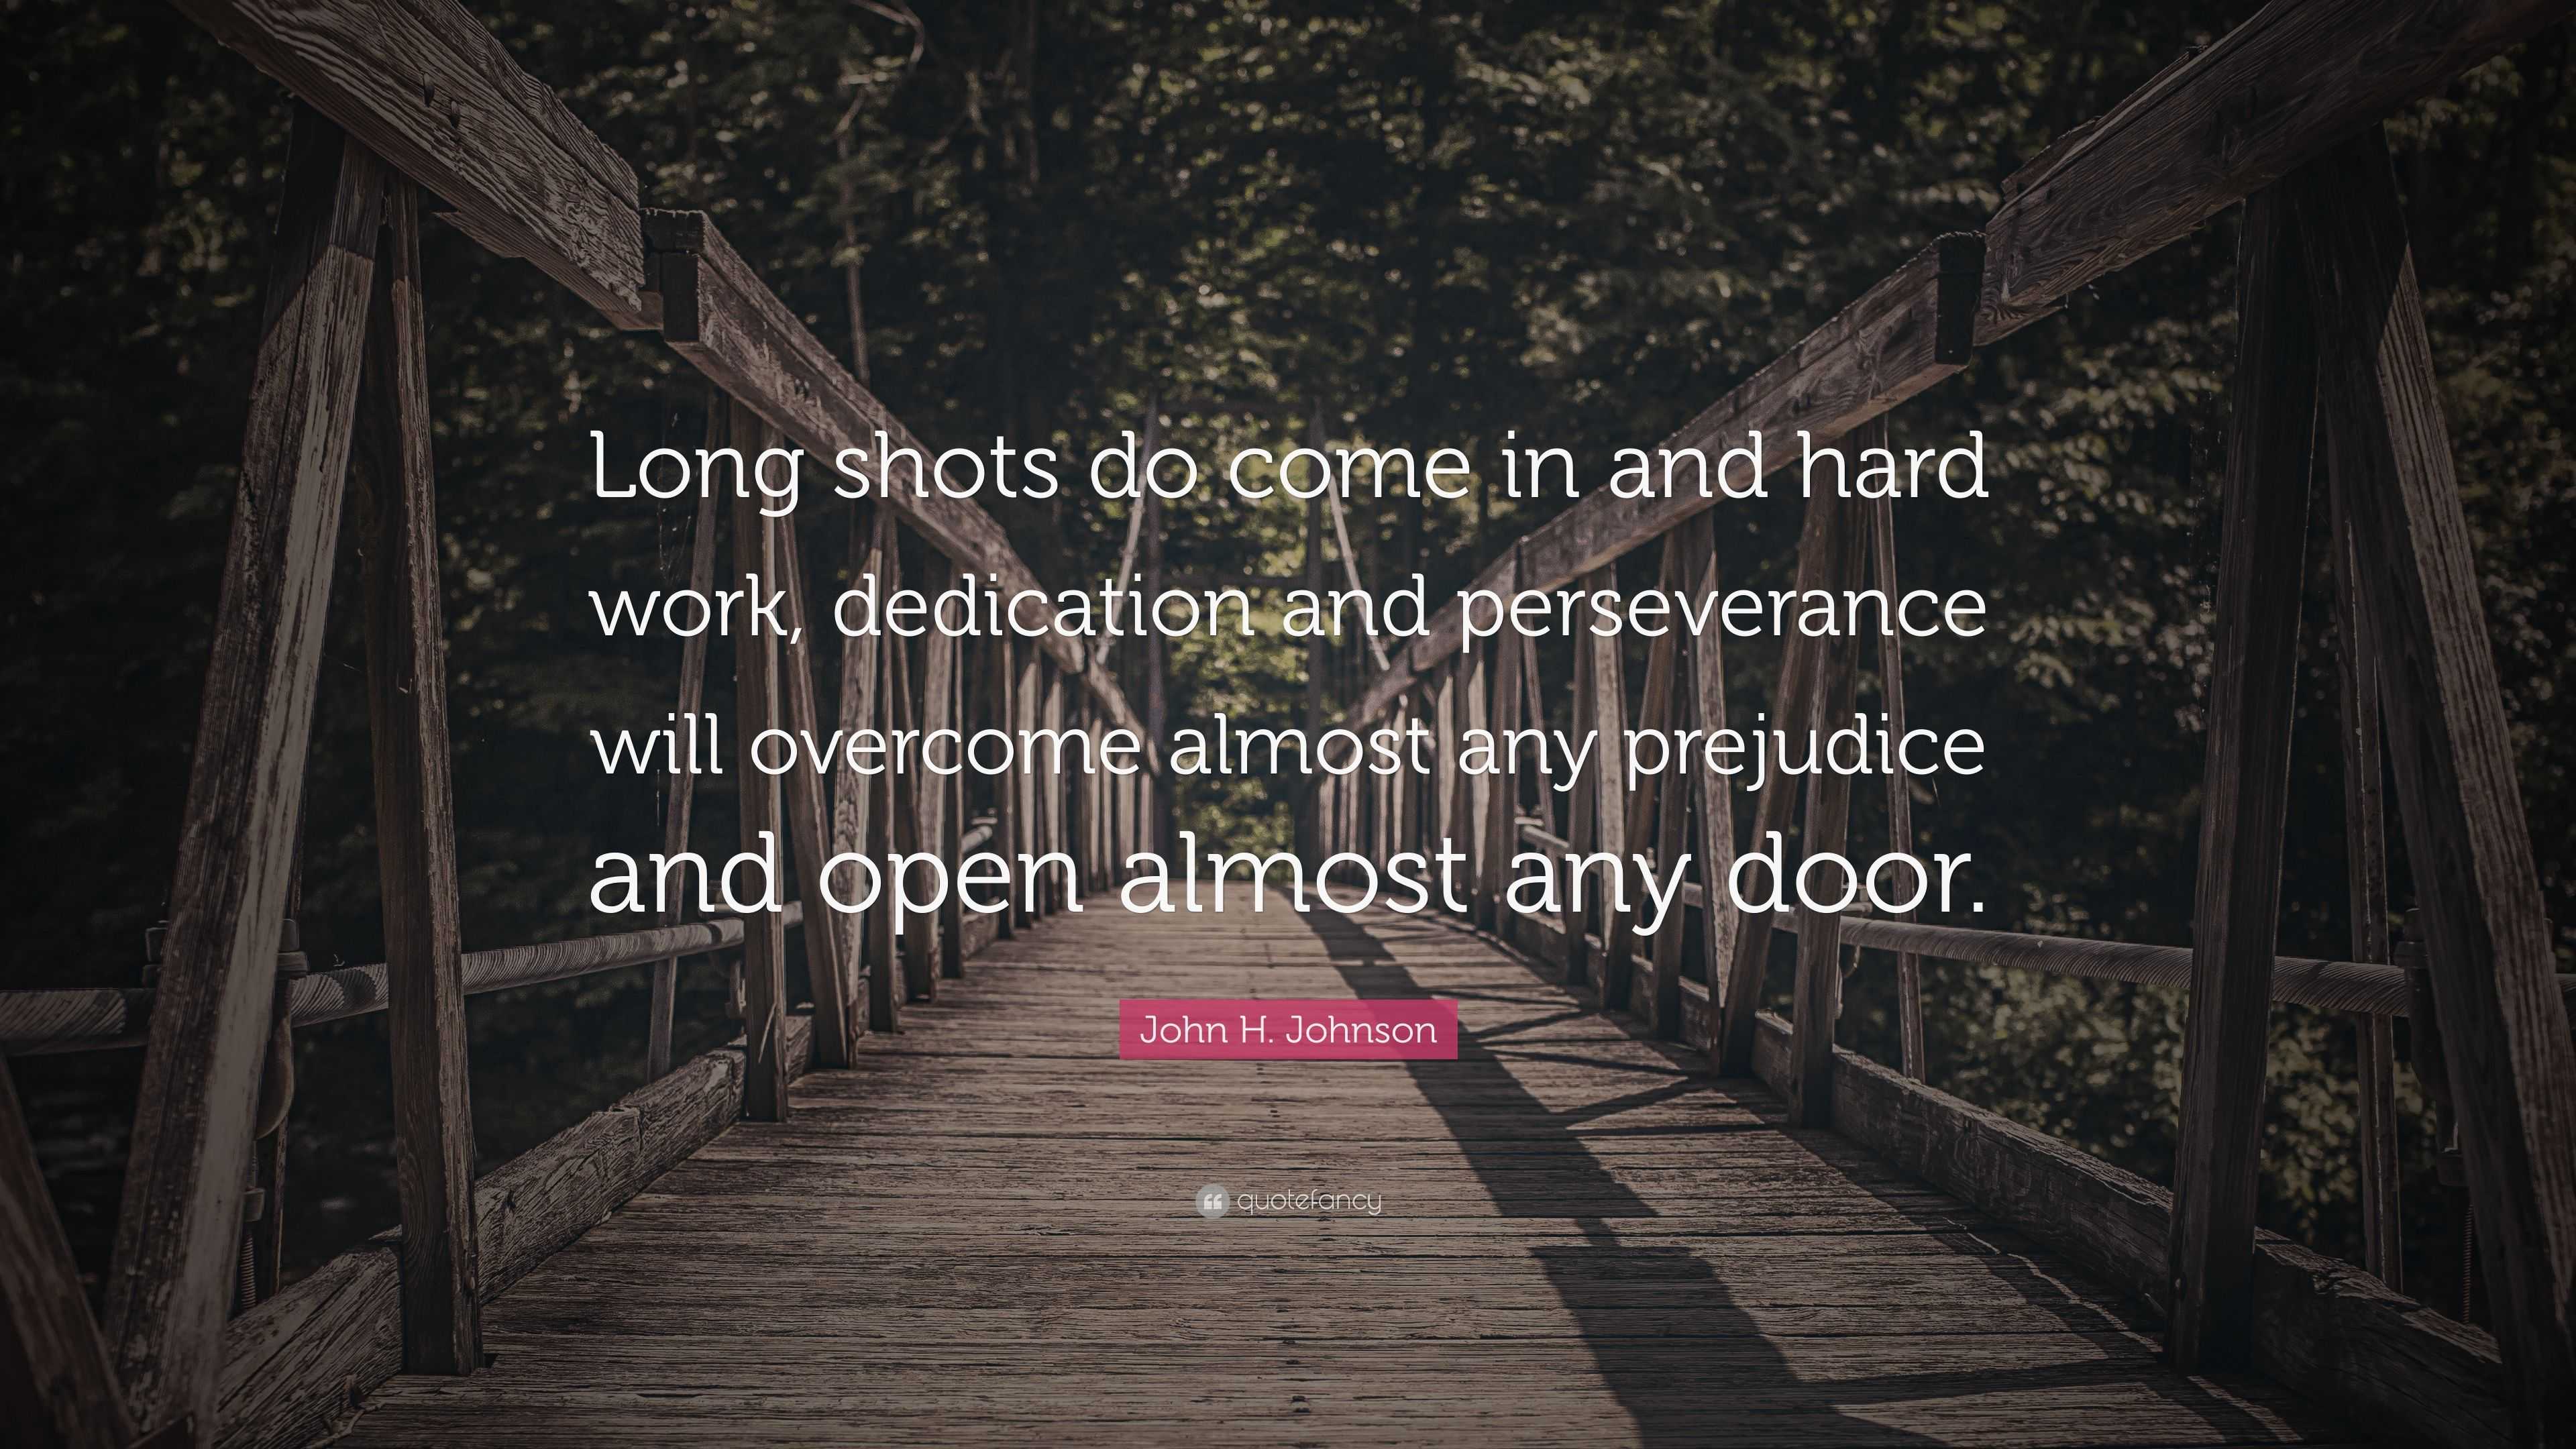 John H. Johnson Quote: “Long shots do come in and hard work, dedication ...